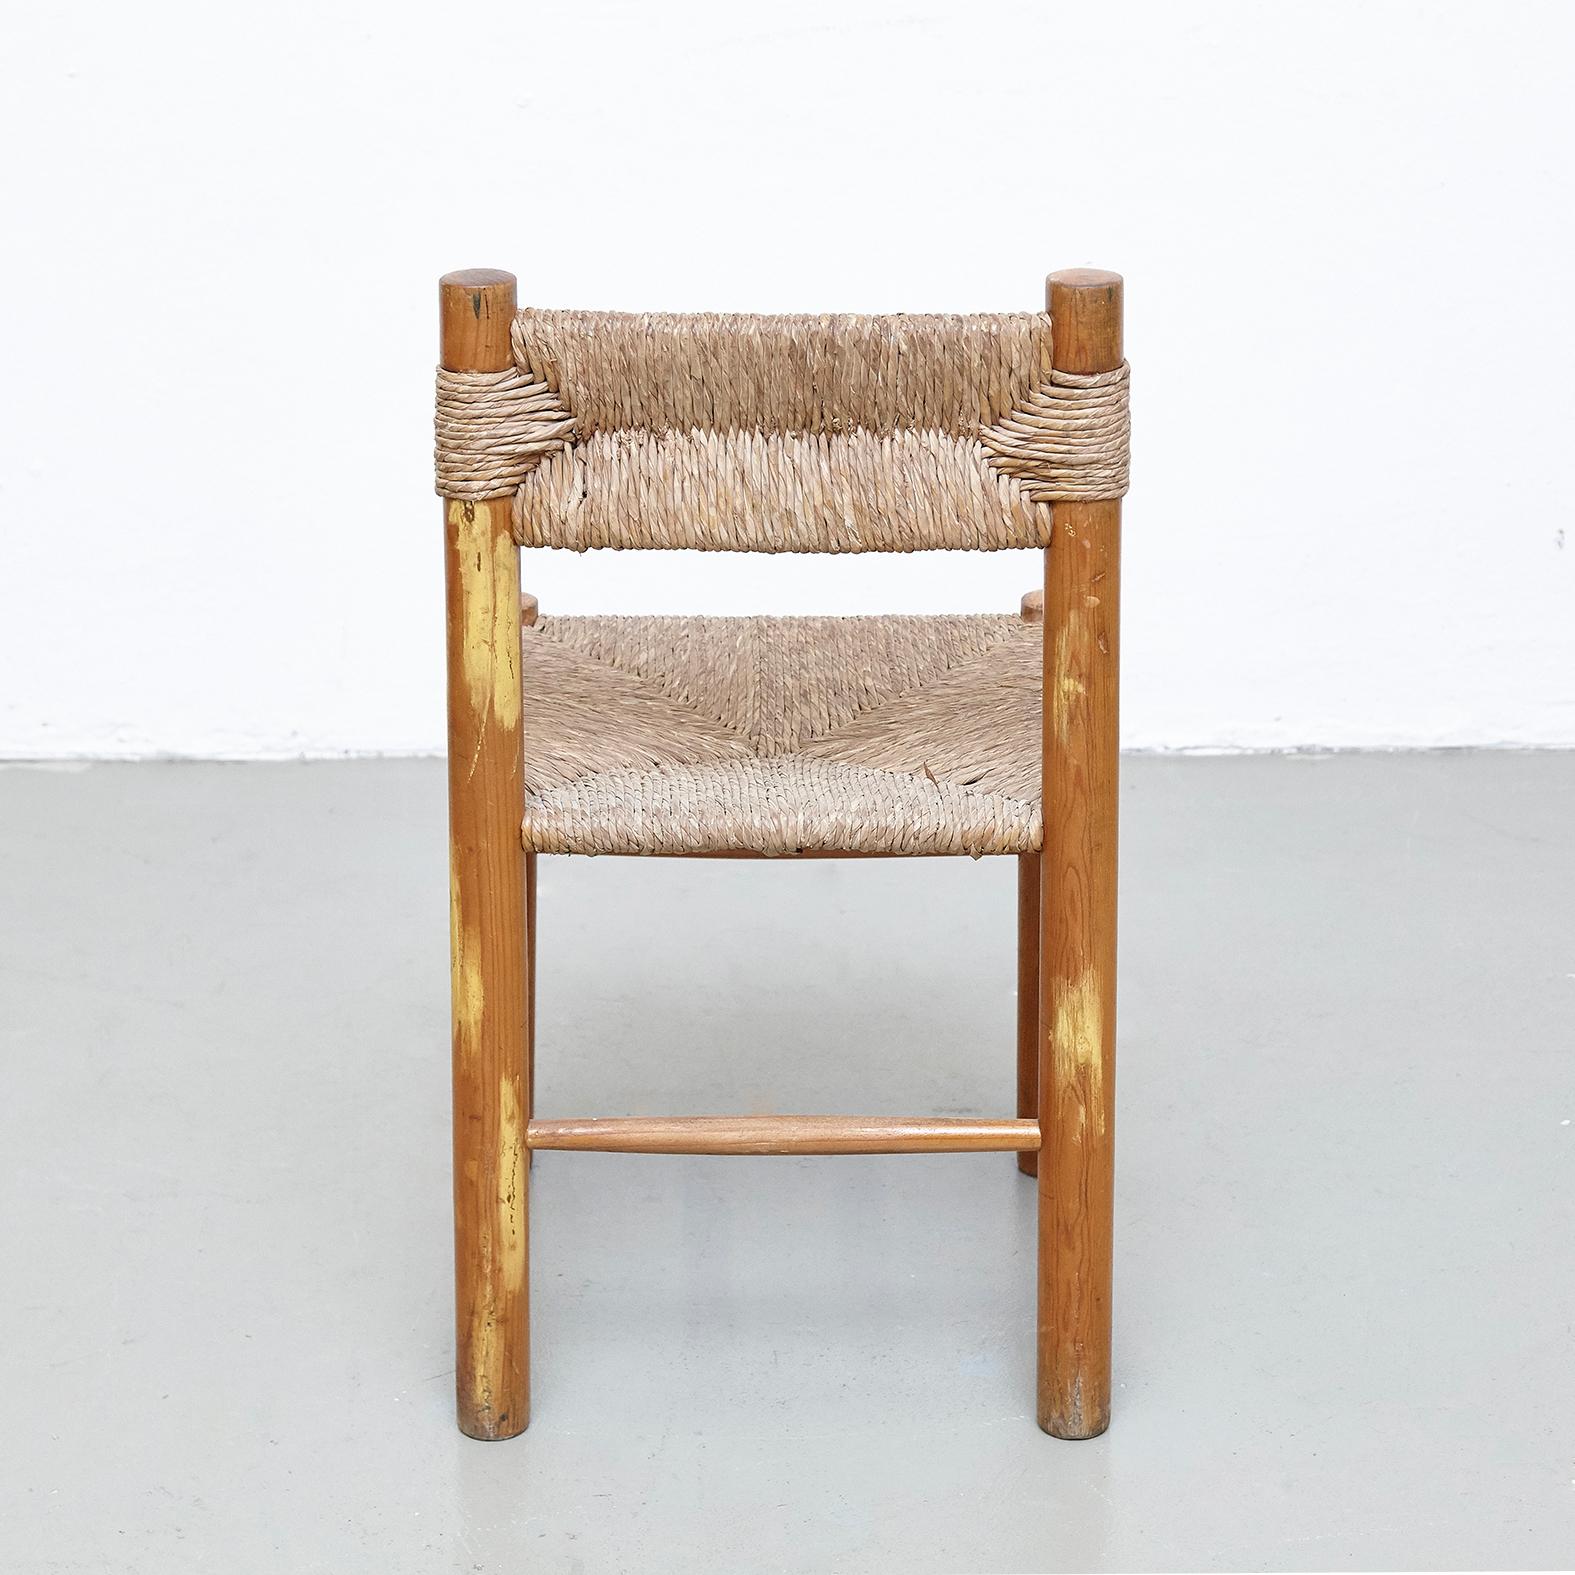 Pair of Chairs After Charlotte Perriand, Wood Rattan, Mid Century Modern 1